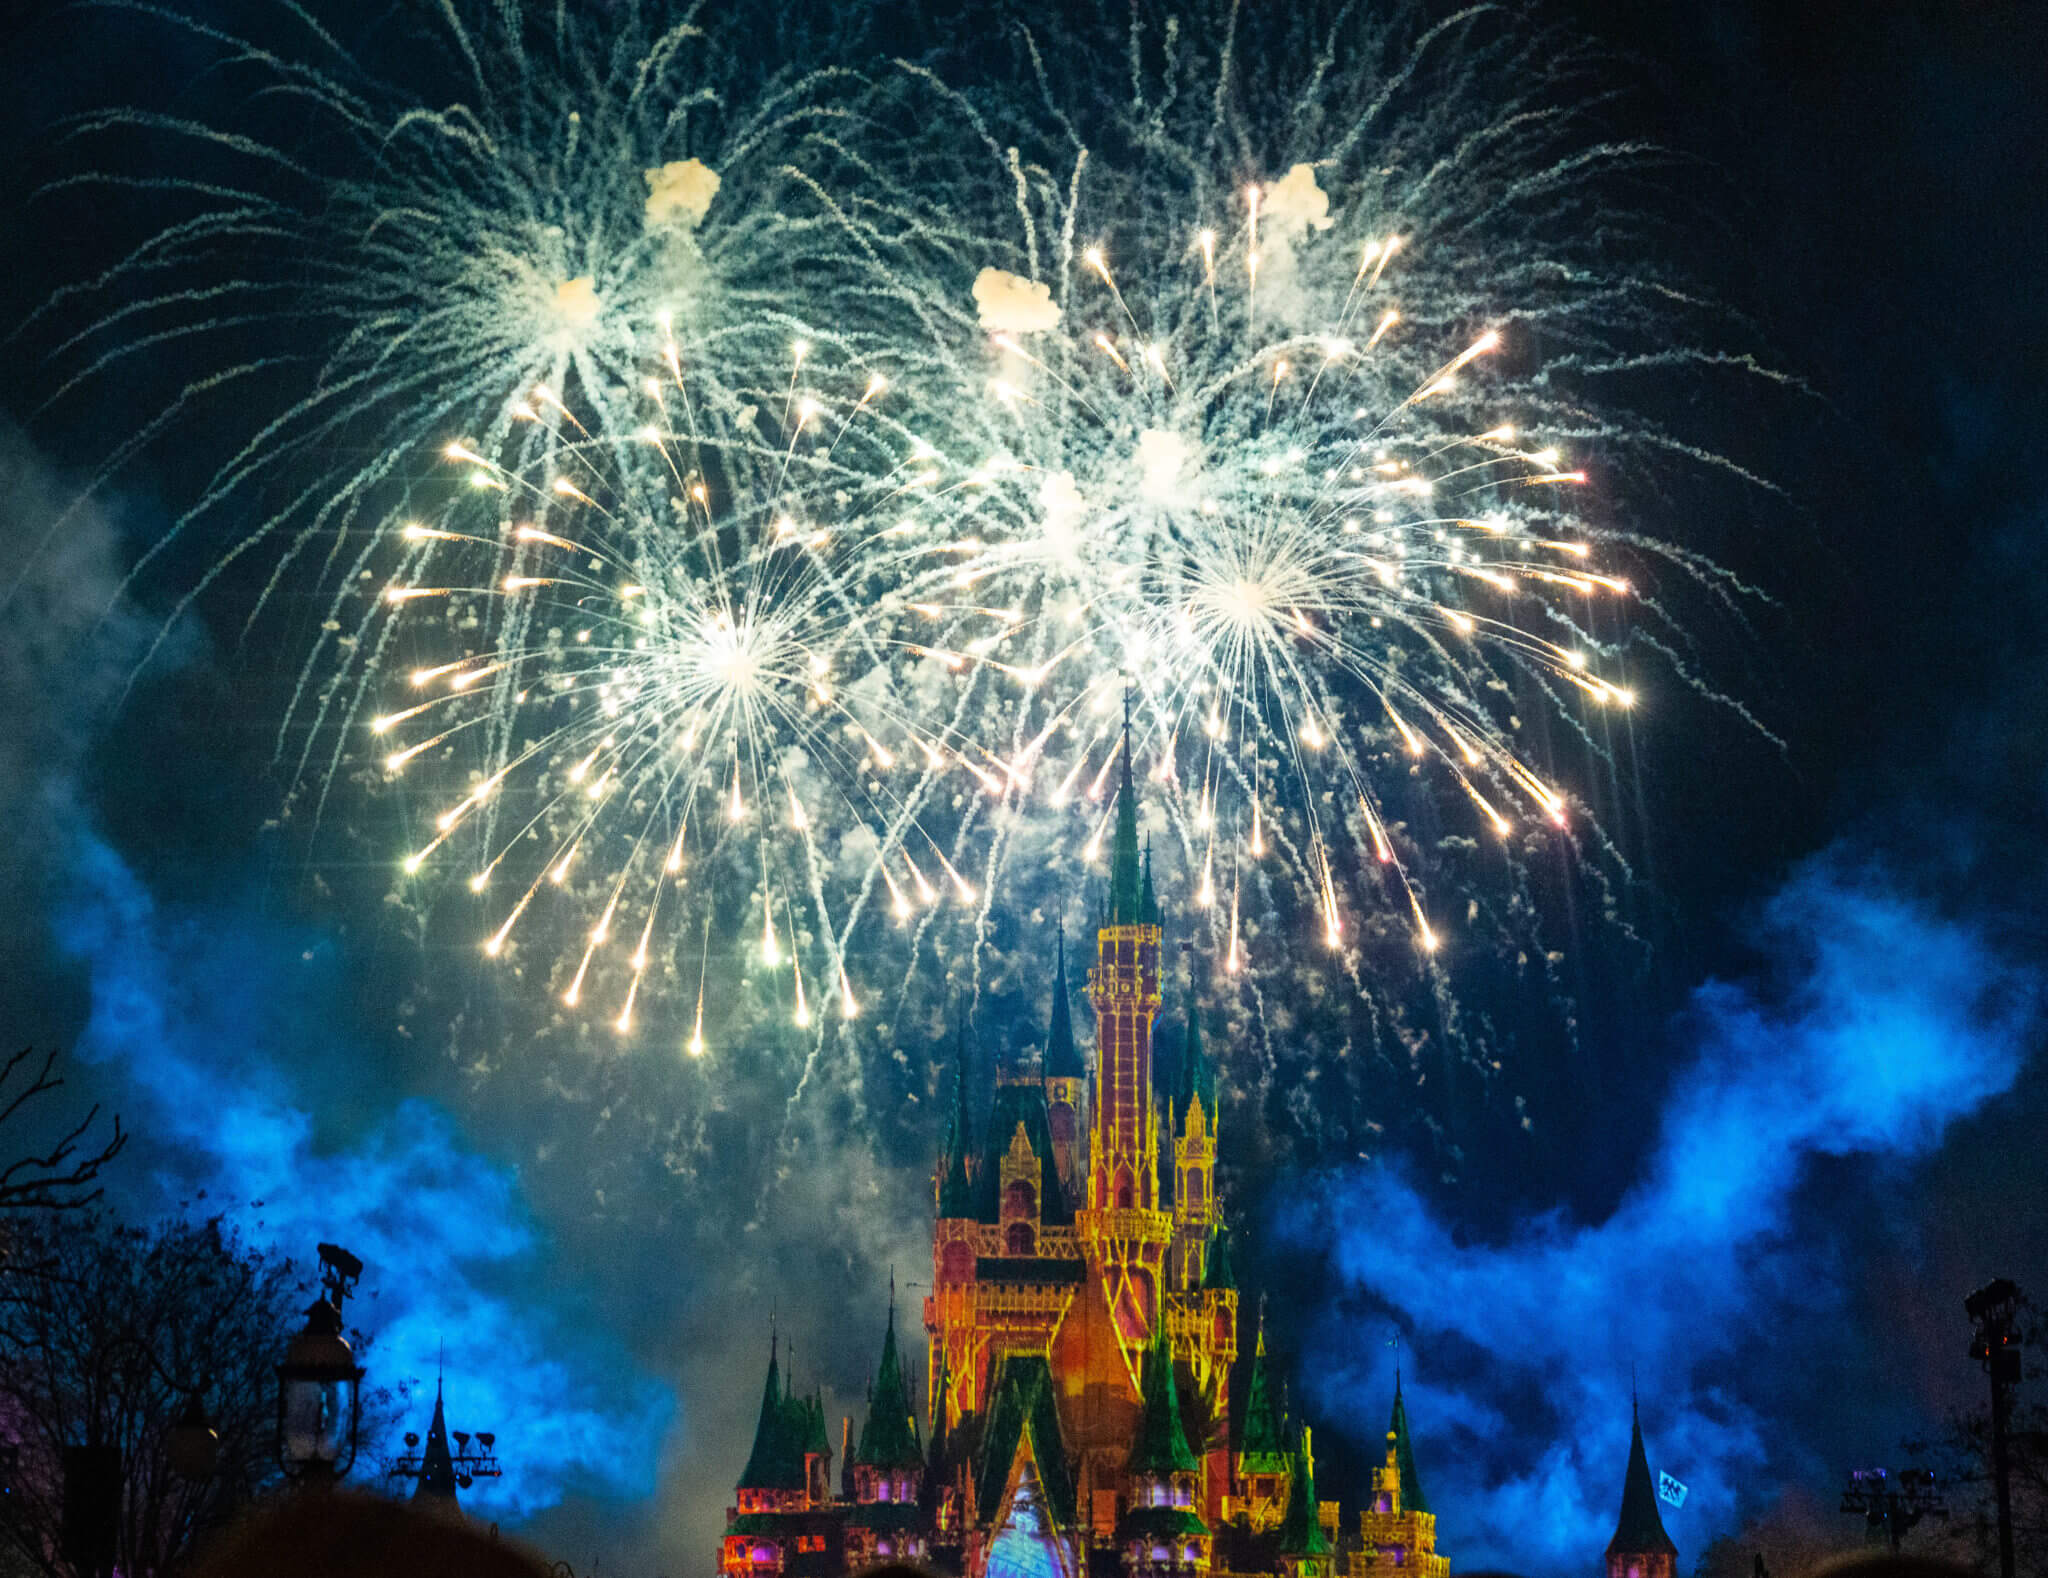 Happily Ever After Fireworks View from Main Street at Disney world in Magic Kingdom